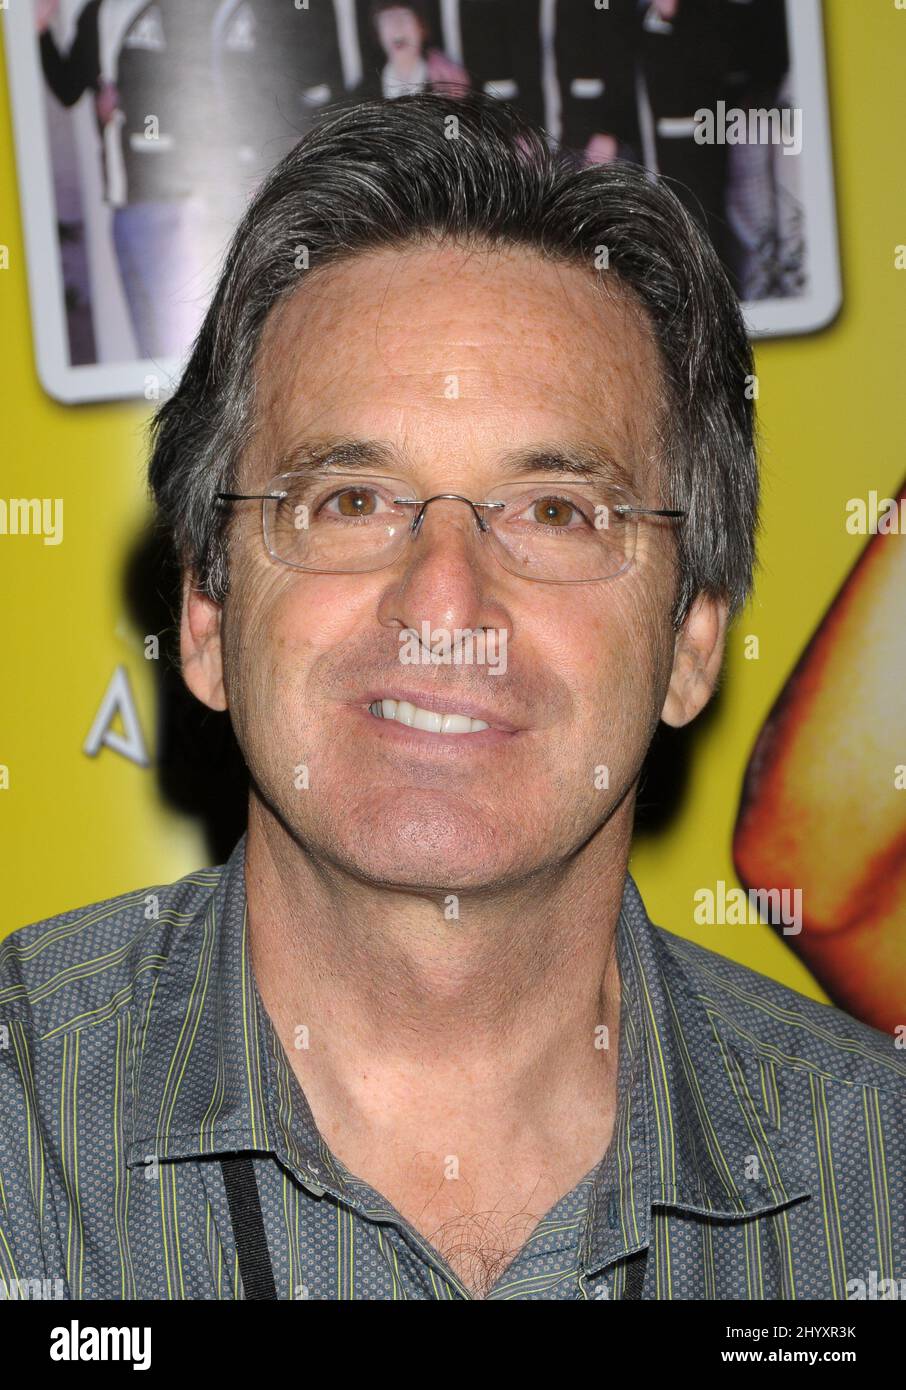 Robert Carradine at the 'The Hollywood Show' Fall 2010 held at the Burbank Airport Marriott Hotel & Convention Center, Burbank, California Stock Photo